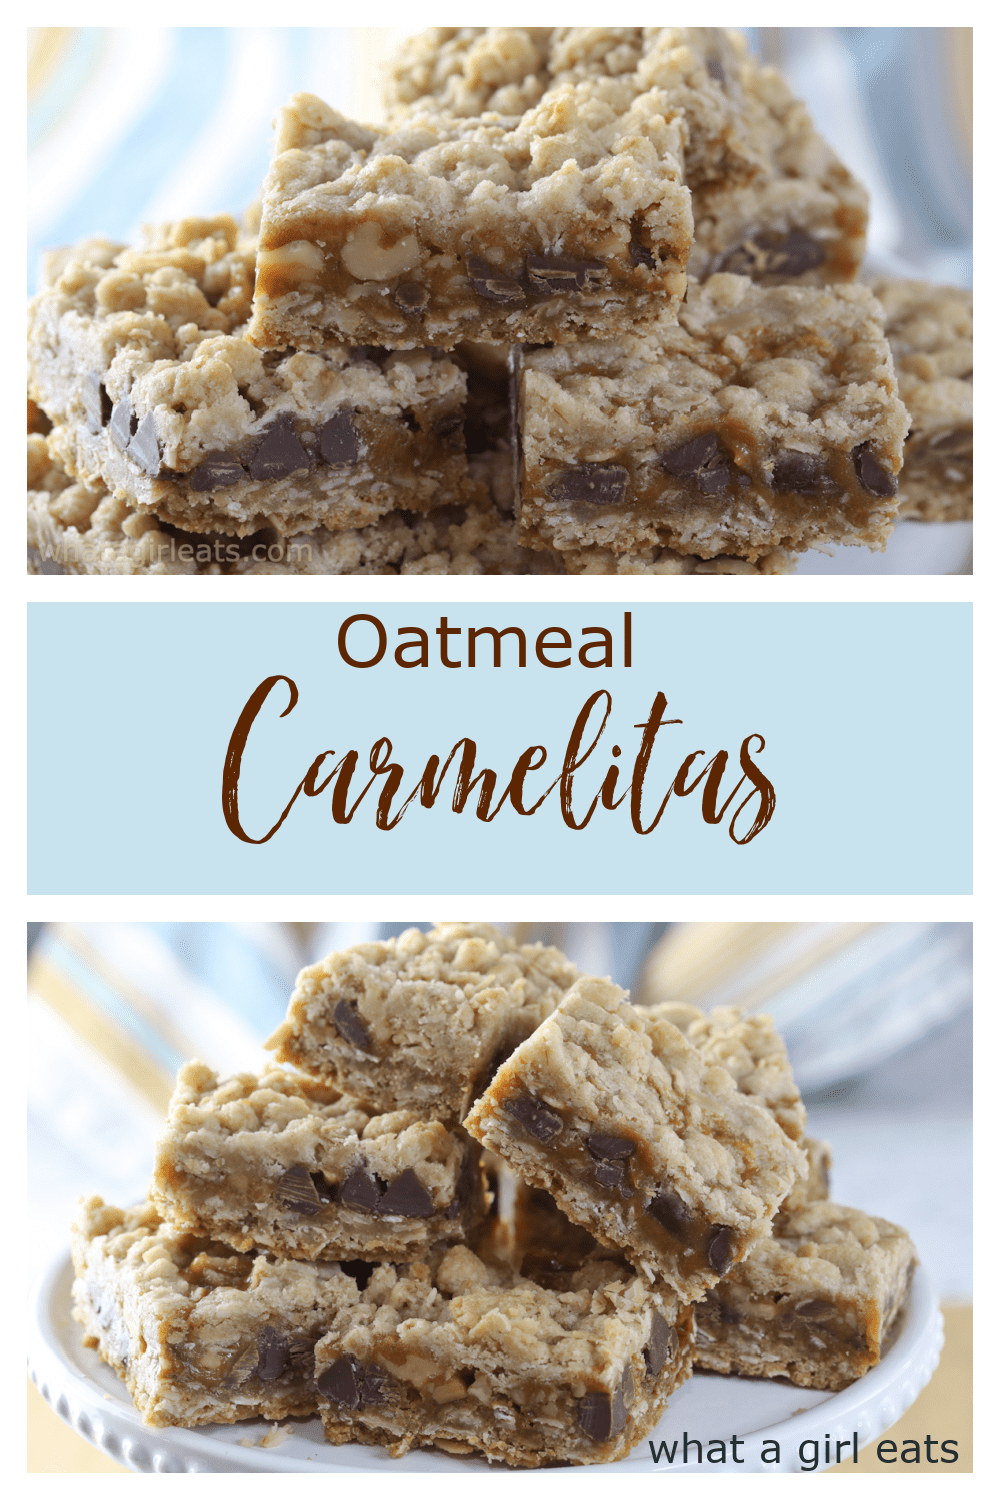 Oatmeal carmelitas are a delicious cookie bar with a buttery oatmeal crust, a creamy caramel filling with chocolate chips and walnuts.